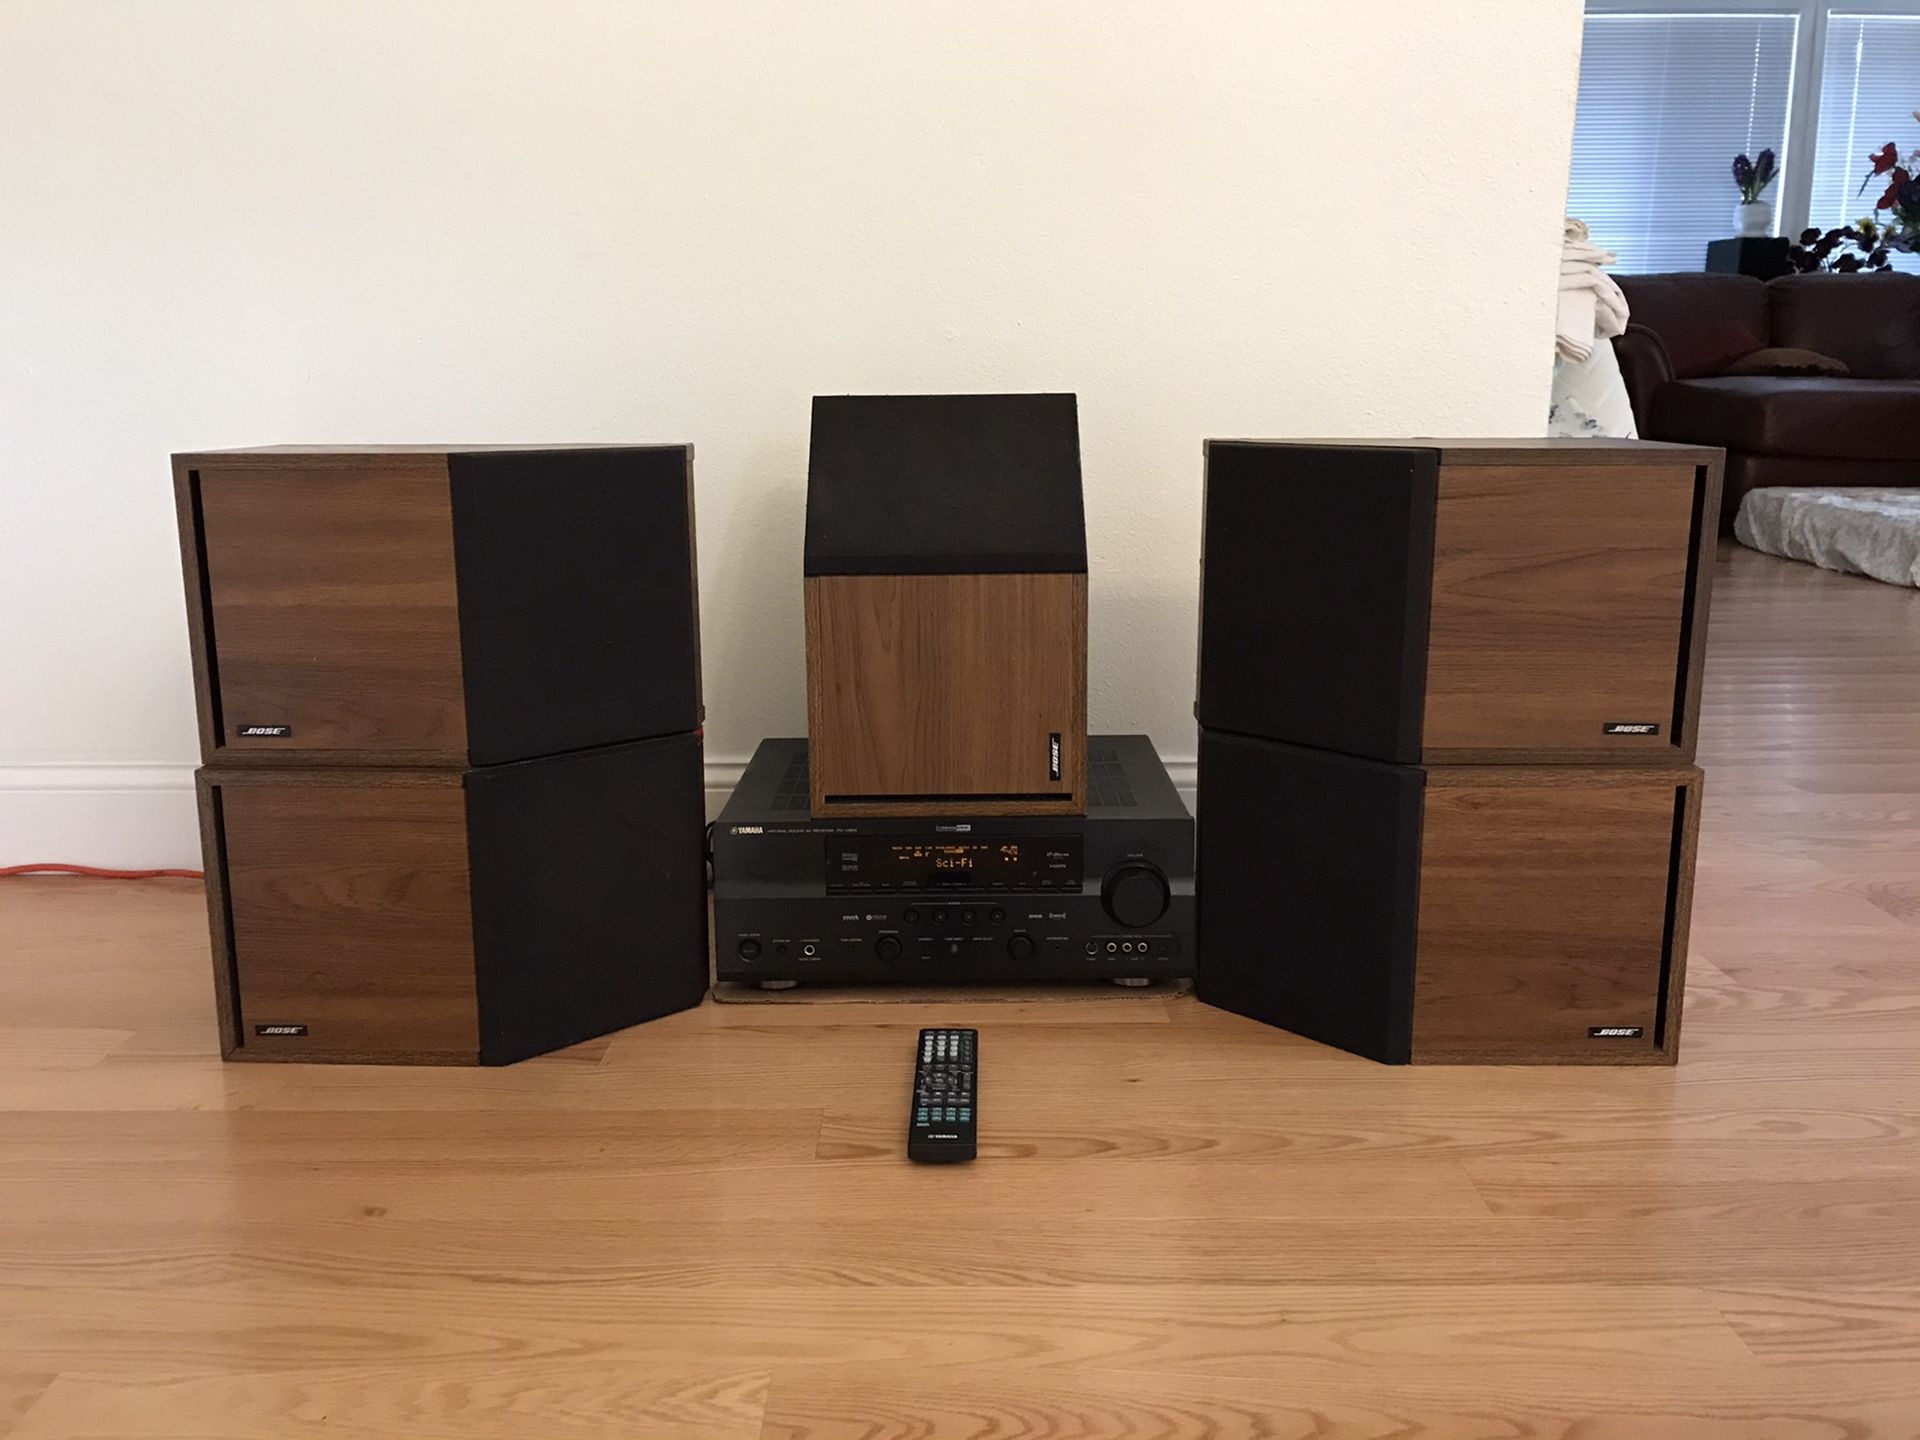 5 Bose 2.2 speakers good condition sound great with Yamaha RX-V663 receiver and remote HDMI connection 7.1 channel 665 Watts, can test...etc.